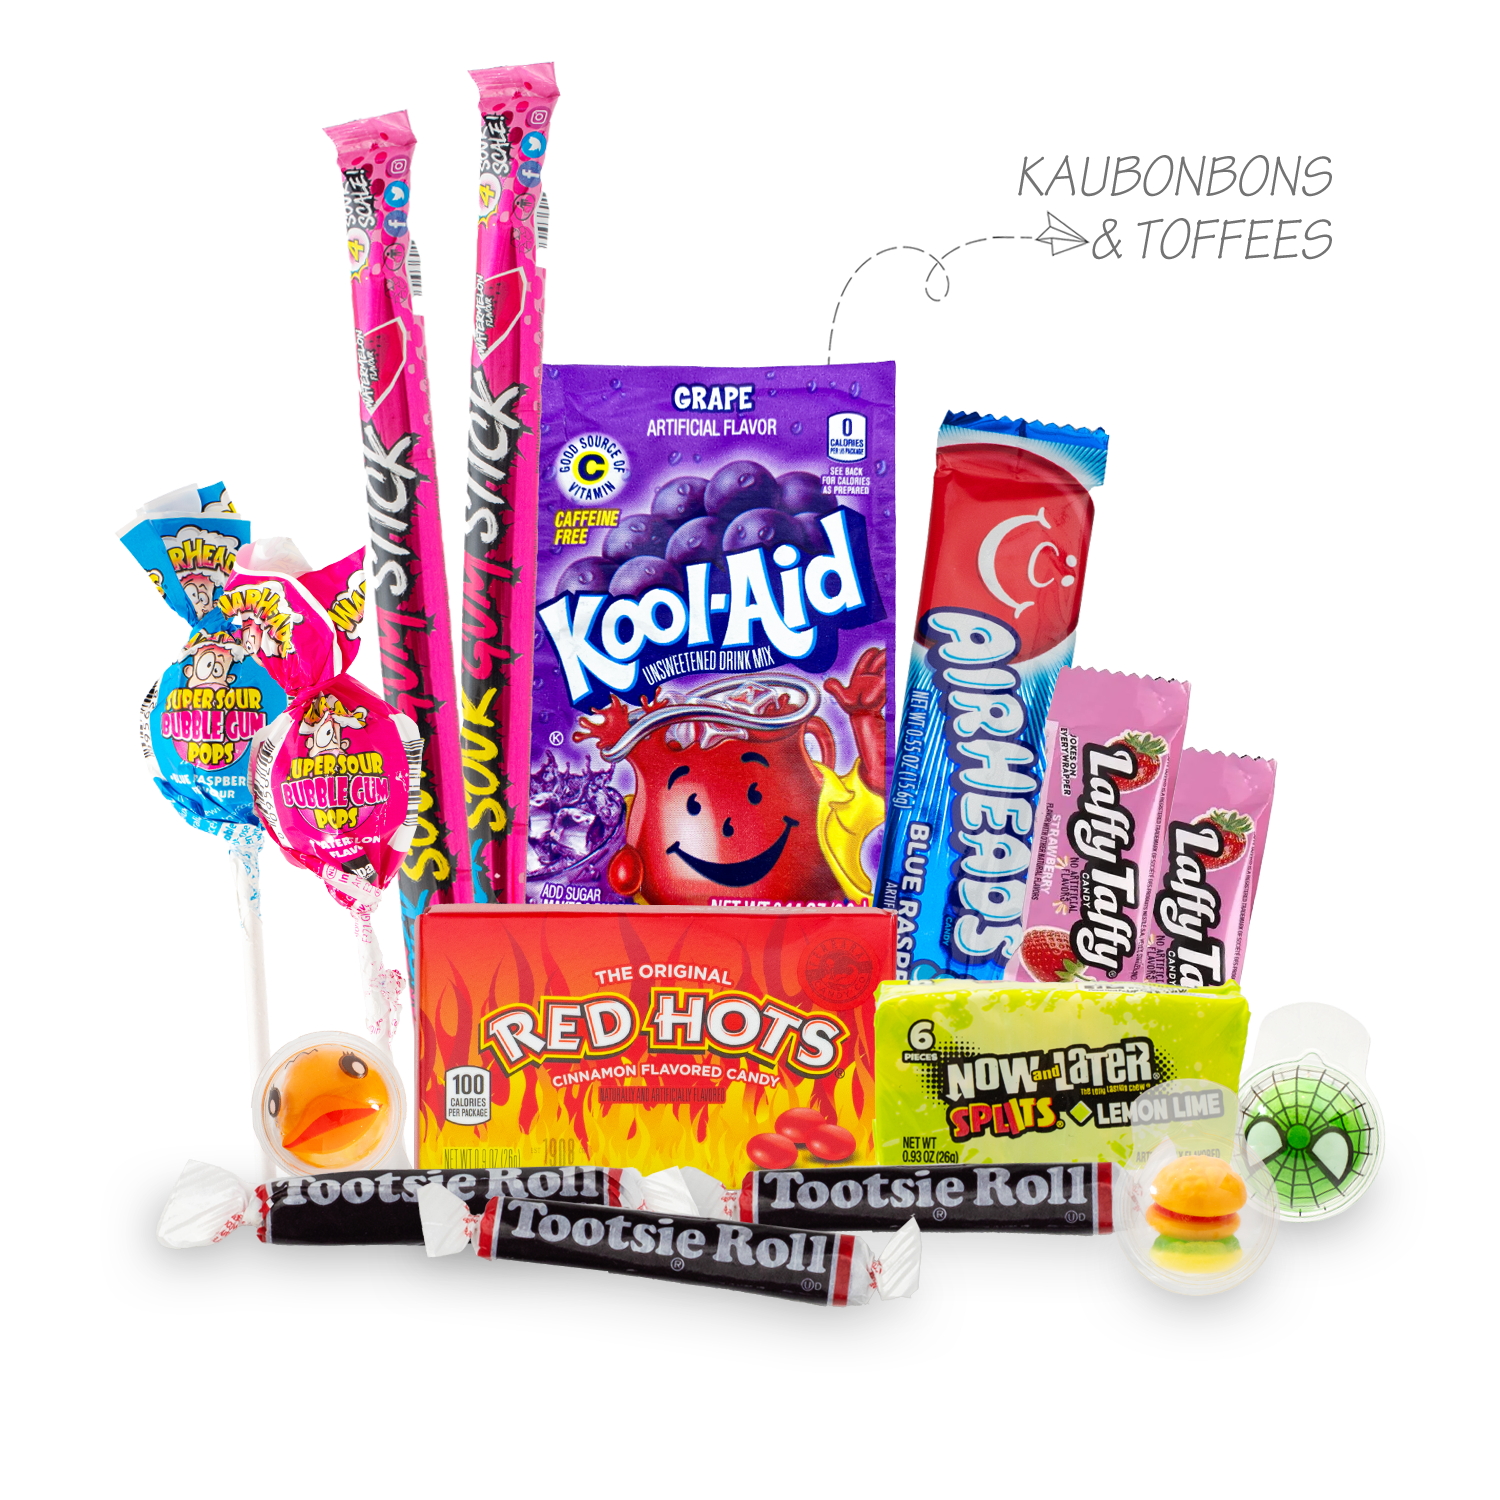 Candy Roads: surprise box with 25 American candies